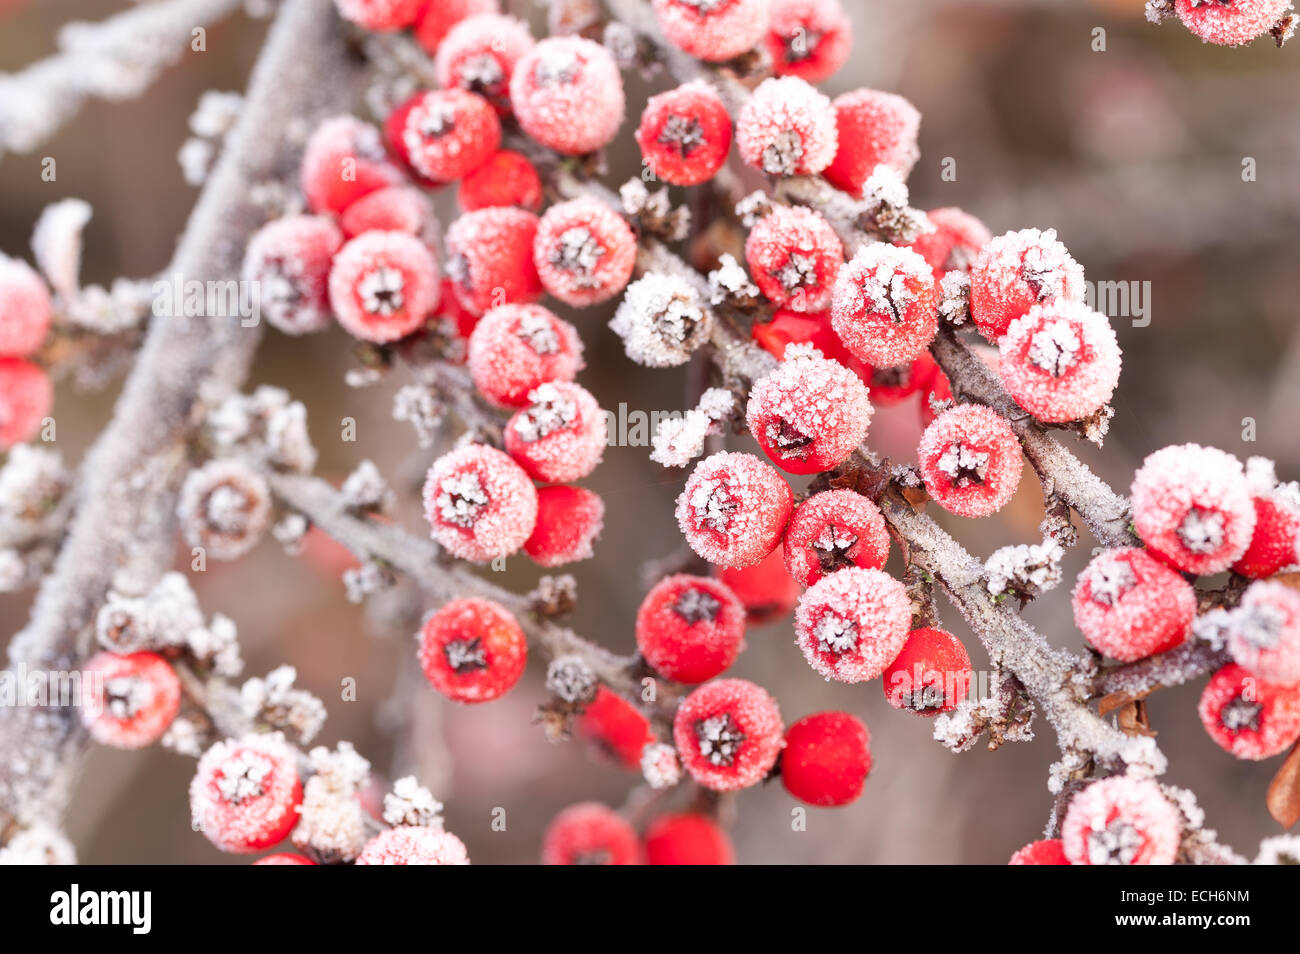 Frozen frost covered red berries cottoneaster shrub a great food source for birds over winter shallow depth of field Stock Photo